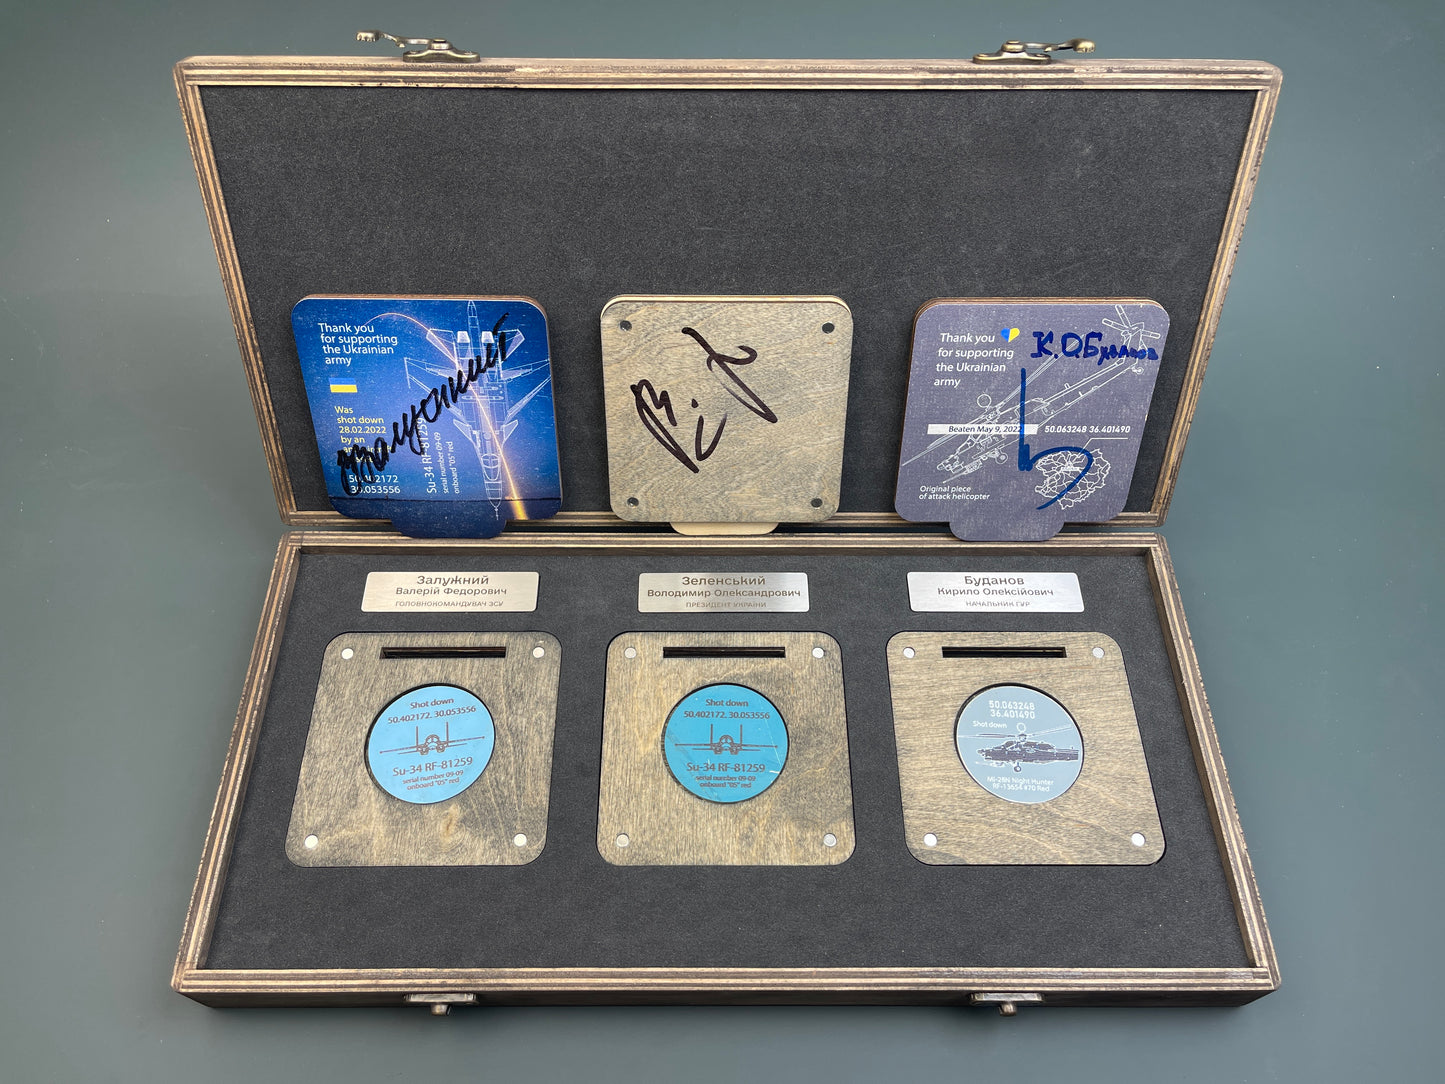 A set of coins with the autographs of President Zelensky and generals Zaluzhny and Budanov